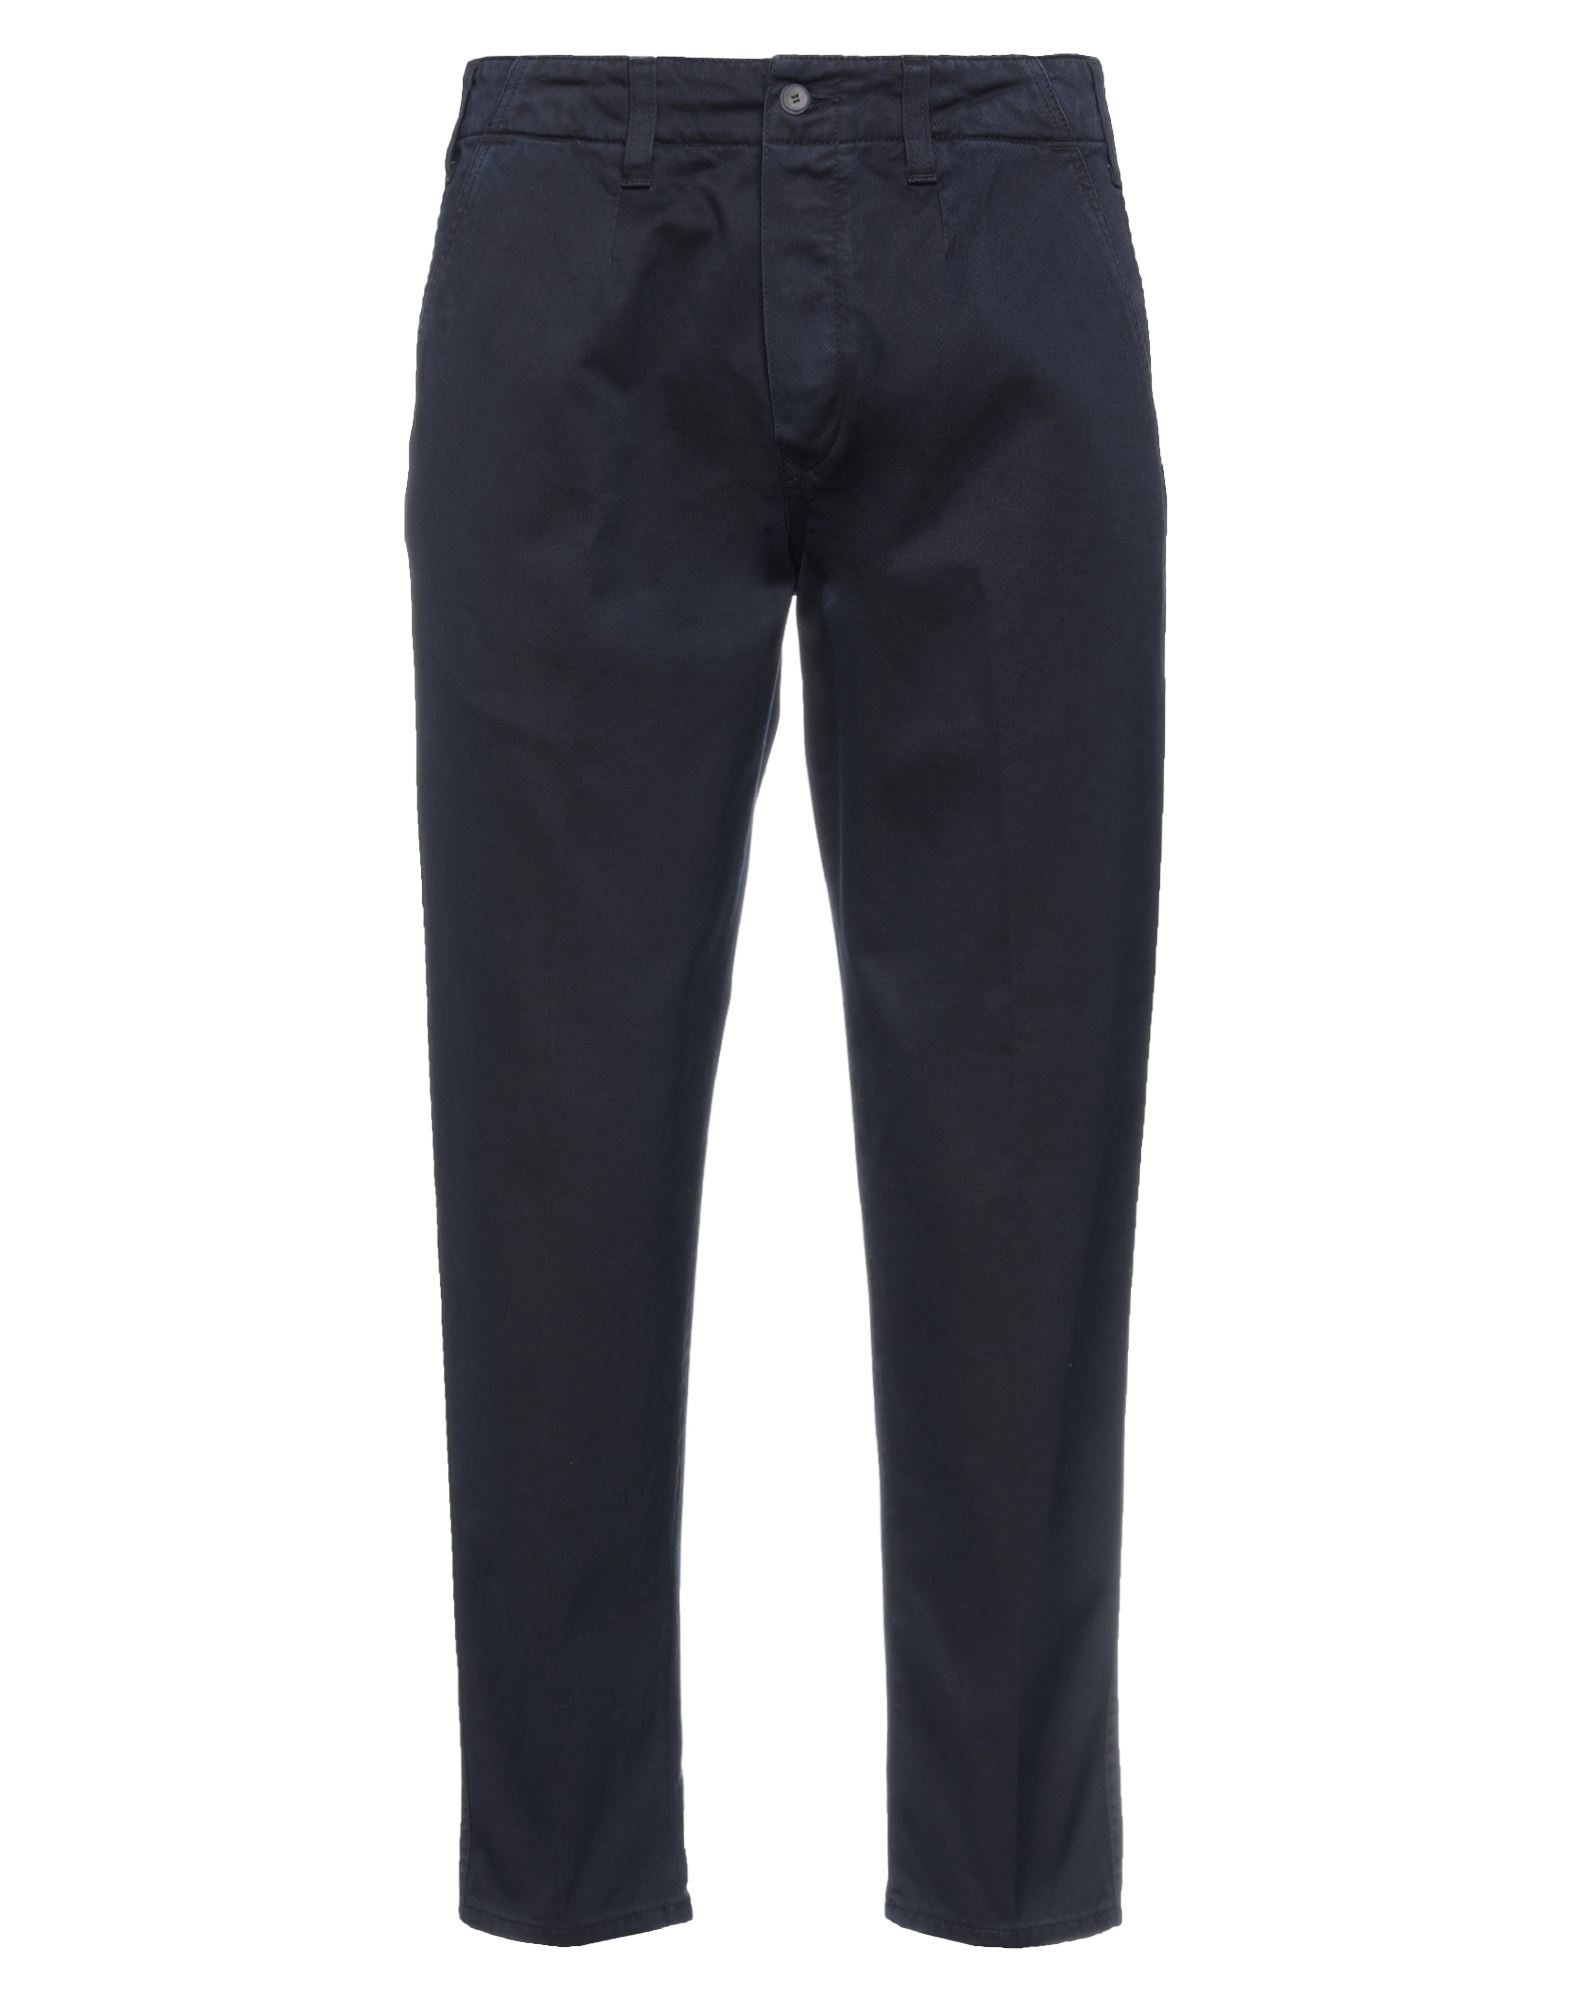 DON THE FULLER DON THE FULLER MAN PANTS MIDNIGHT BLUE SIZE 31 COTTON,13485405DI 5